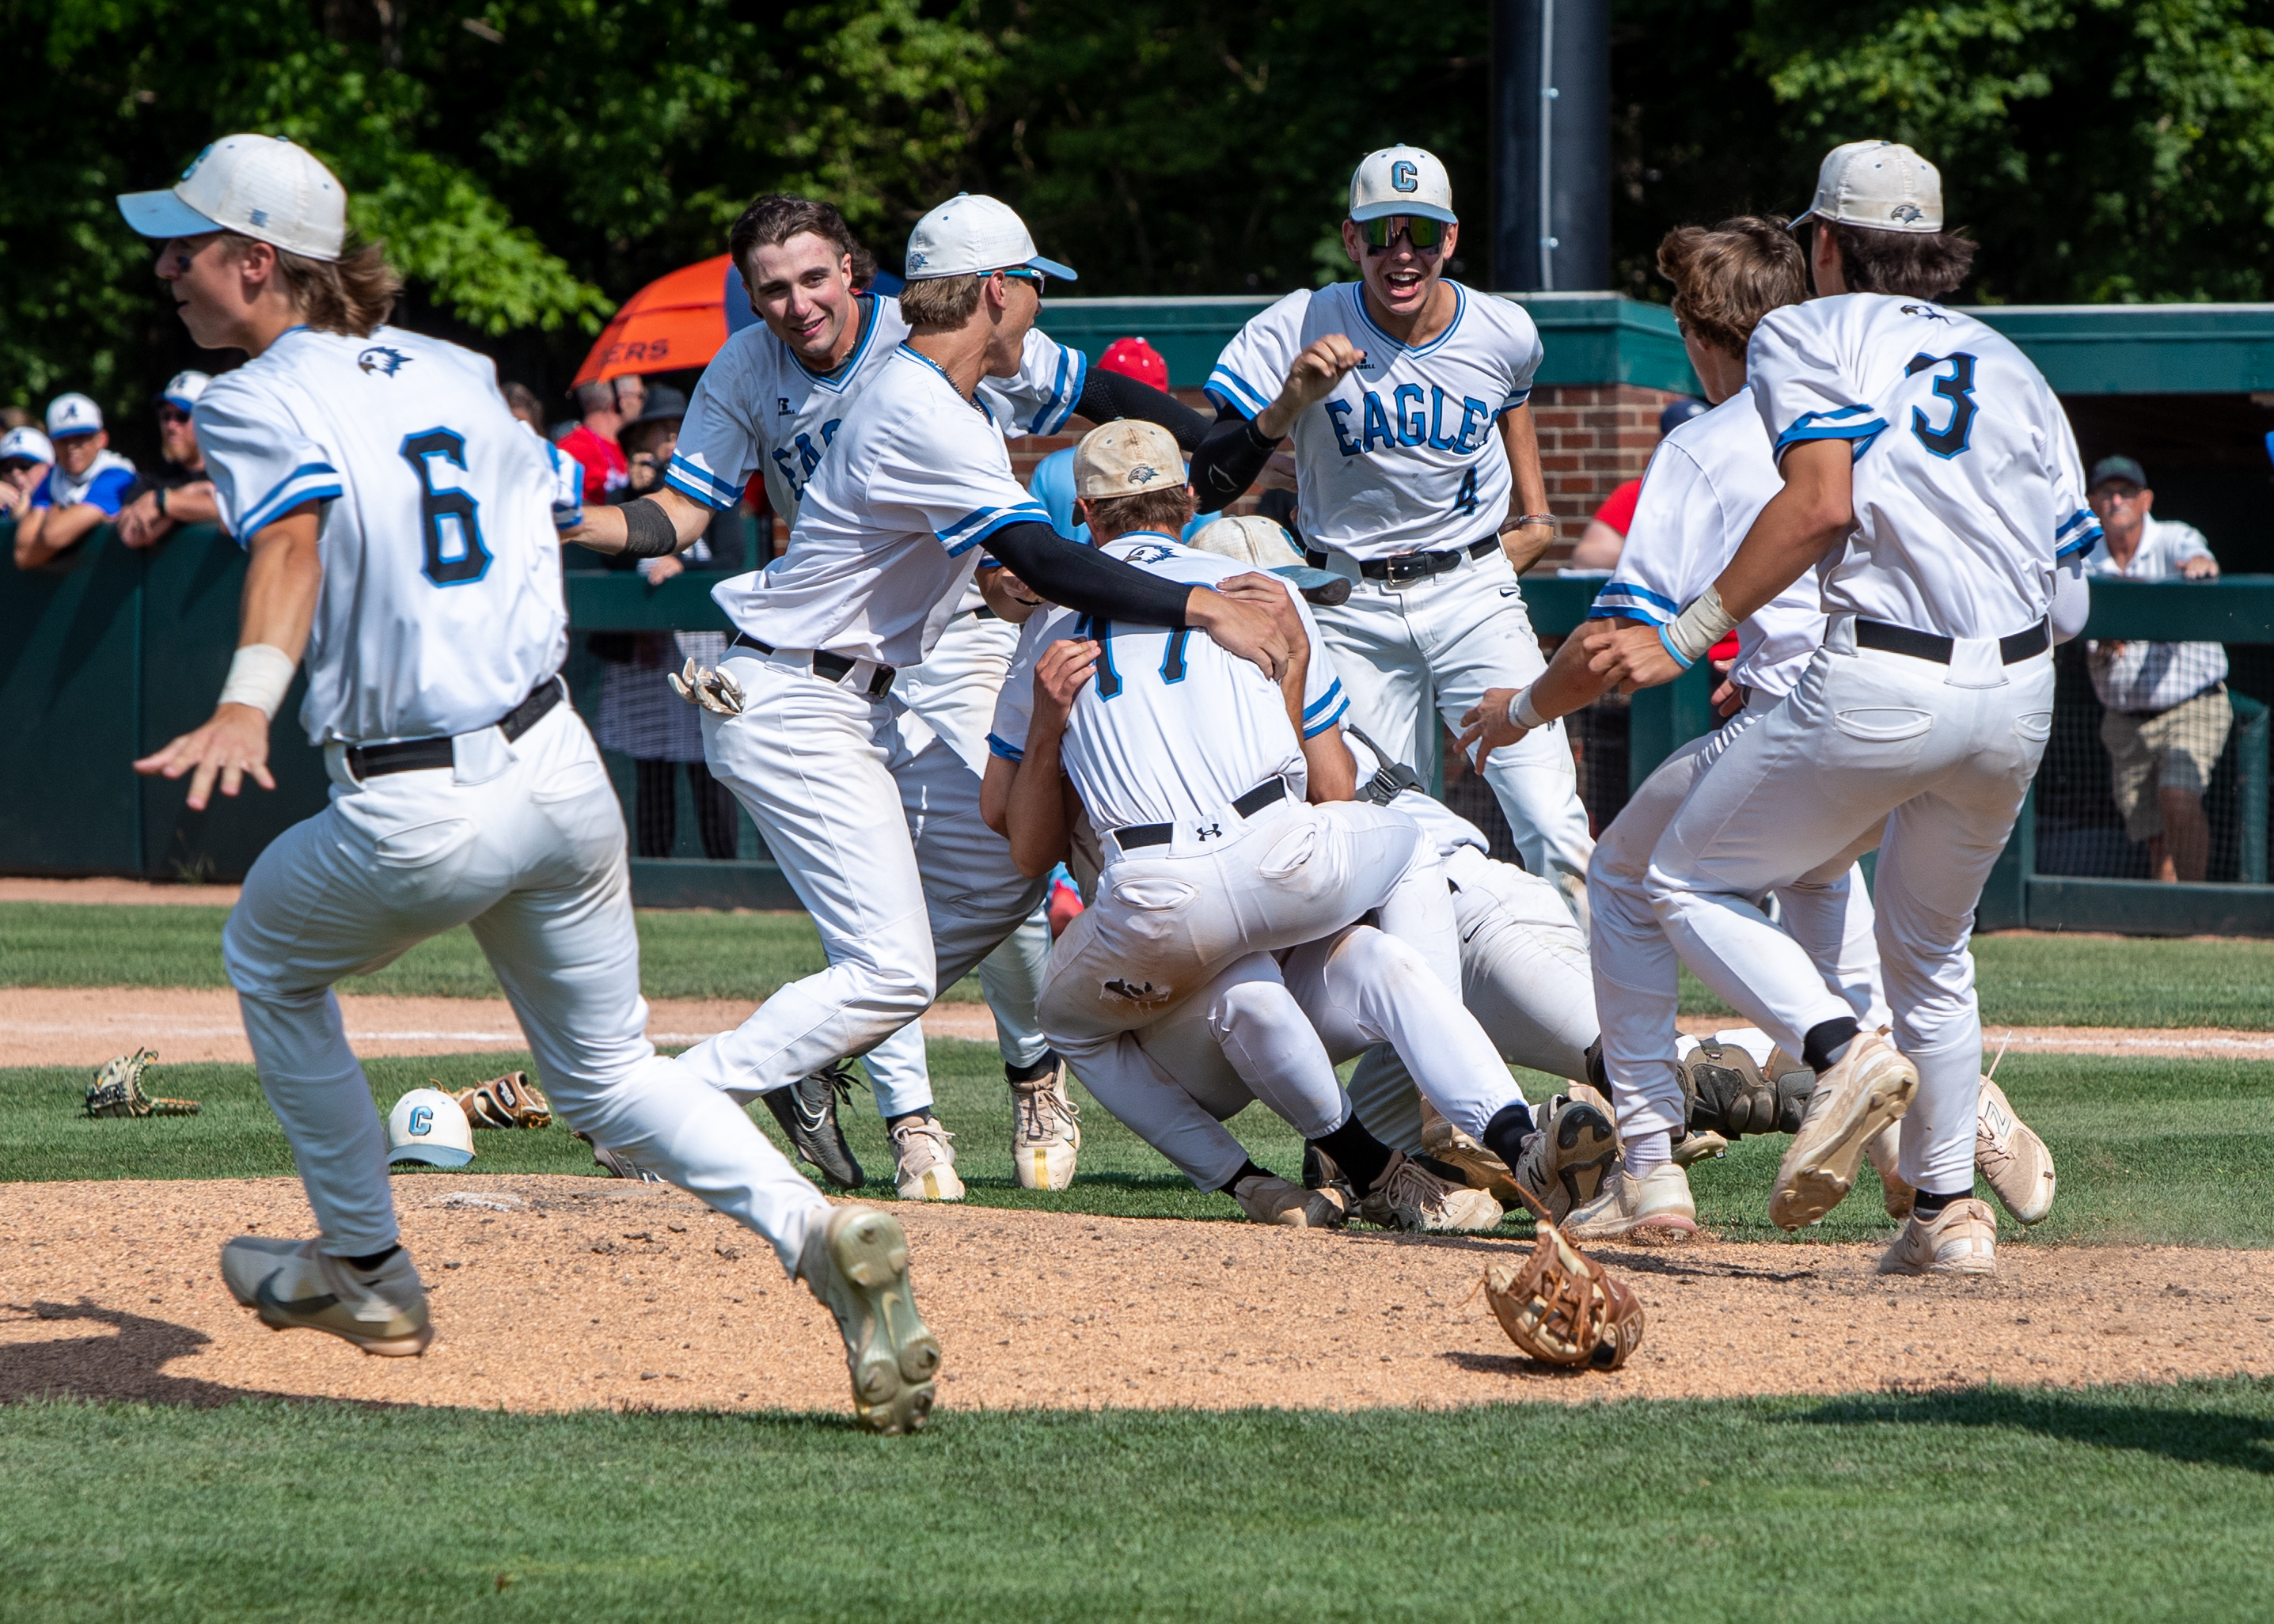 Grand Rapids Christian baseball completes state title journey with 2-1 win over Liggett in D2 final